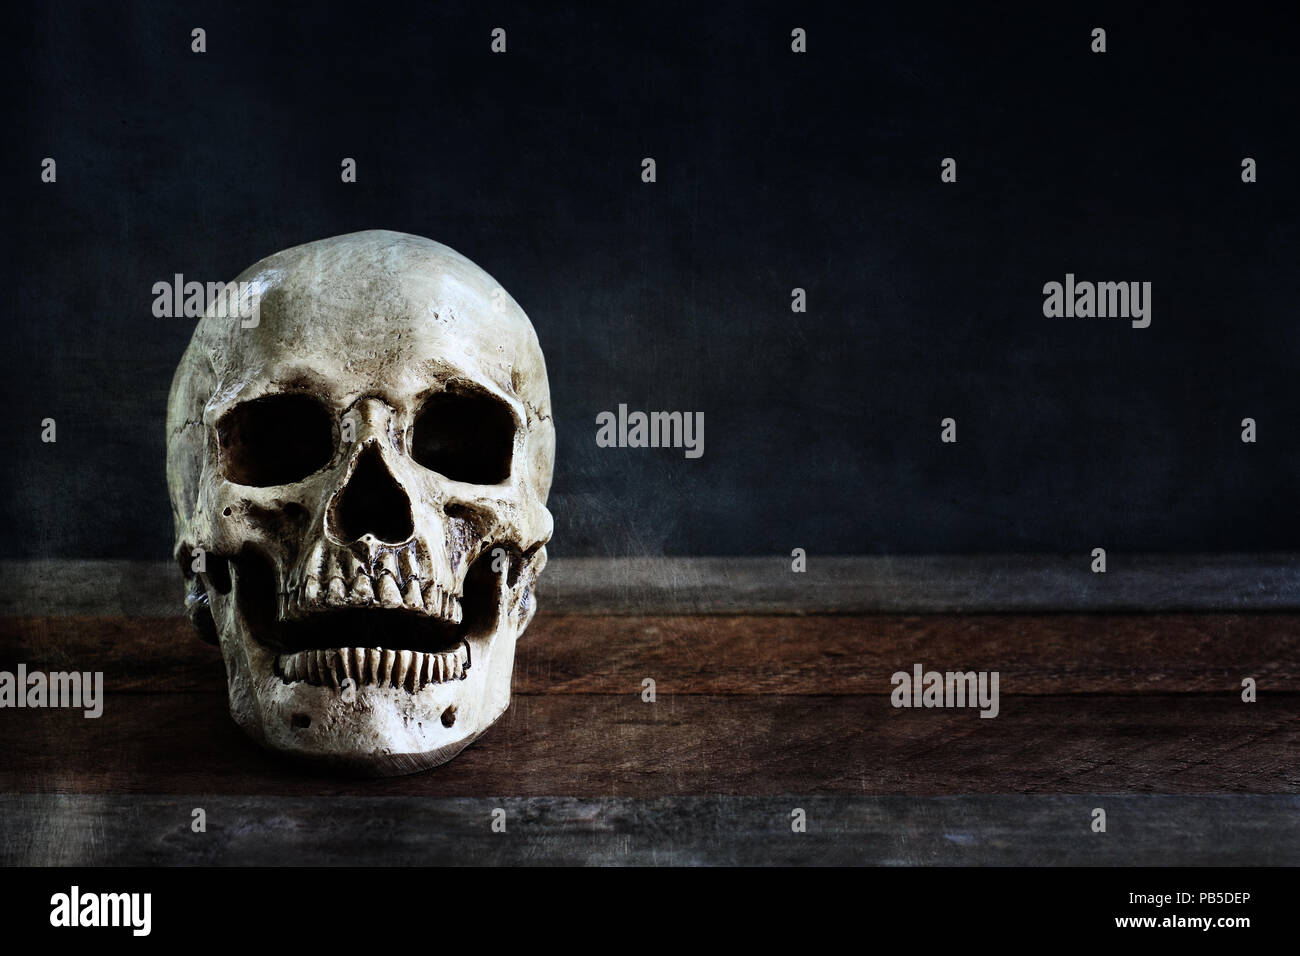 Halloween human skull on an old wooden table in front of black background with free space for text. Stock Photo